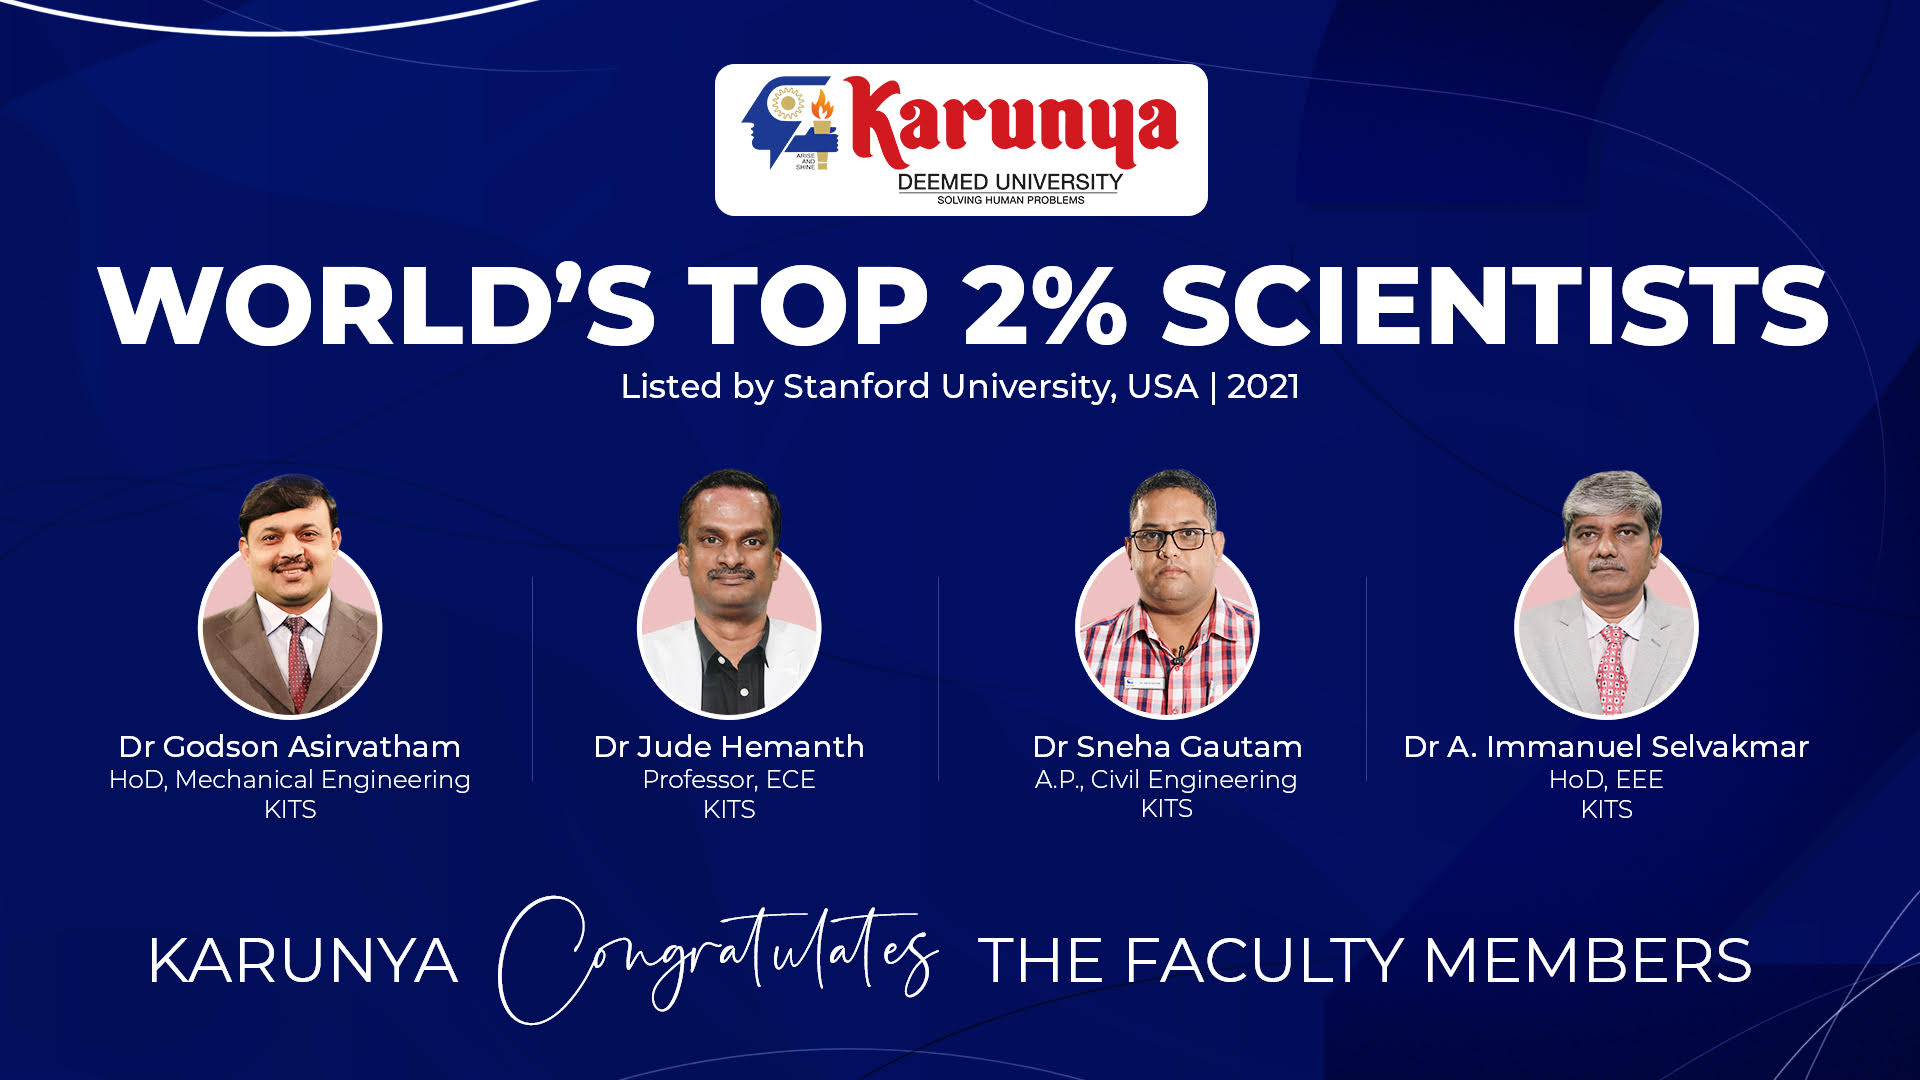 
World's top 2% scientists by Stanford University include professors from Karunya Deemed University
